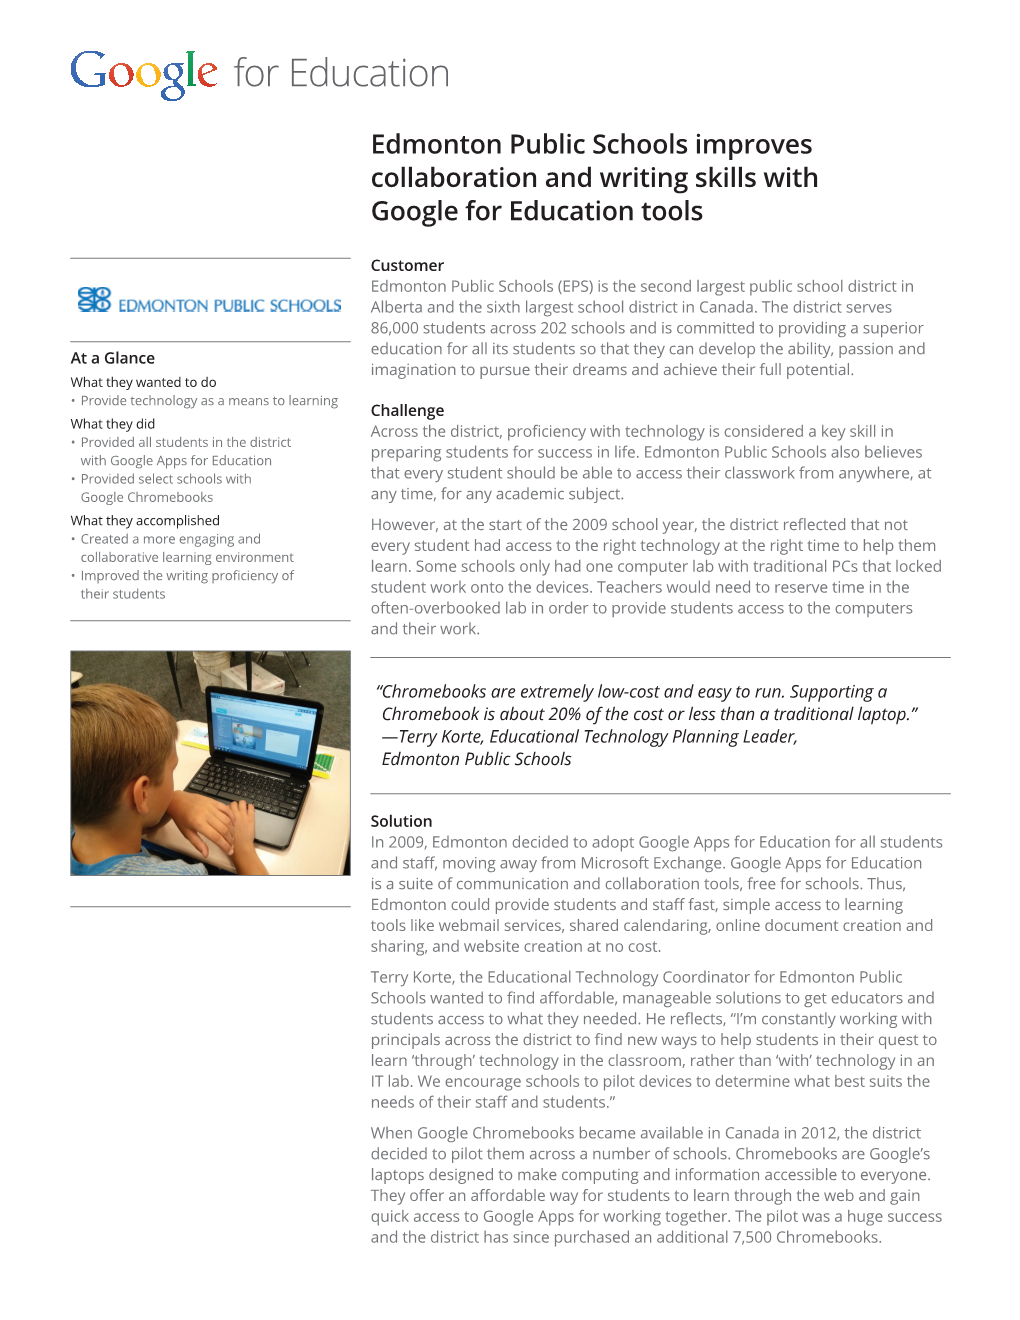 Edmonton Public Schools Improves Collaboration and Writing Skills with Google for Education Tools